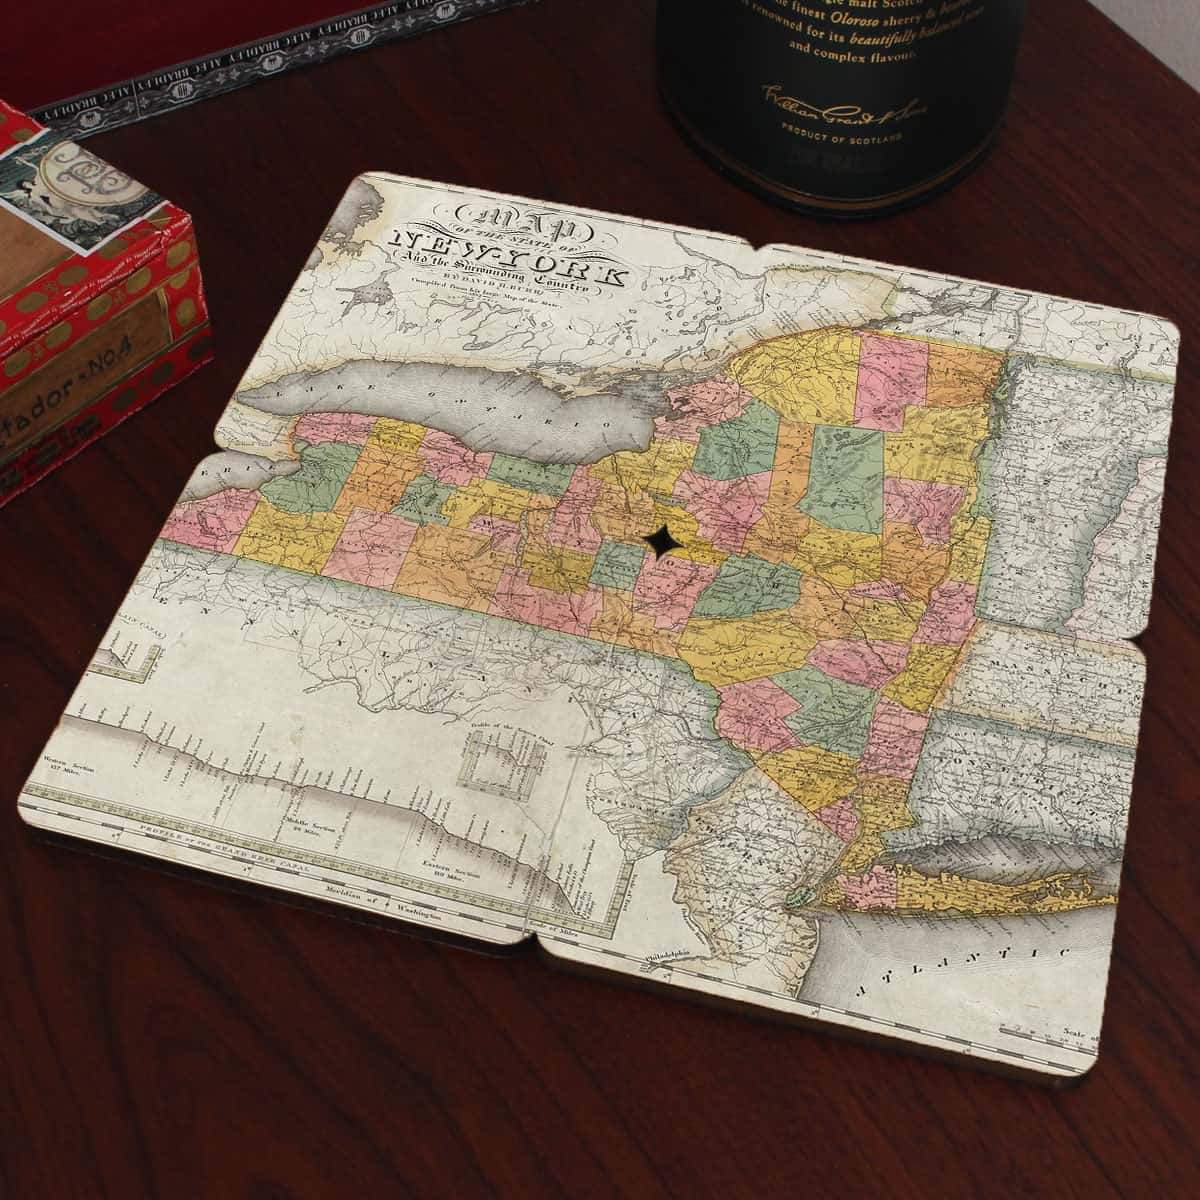 Torched Products Coasters New York Old World Map Coaster (790595371125)